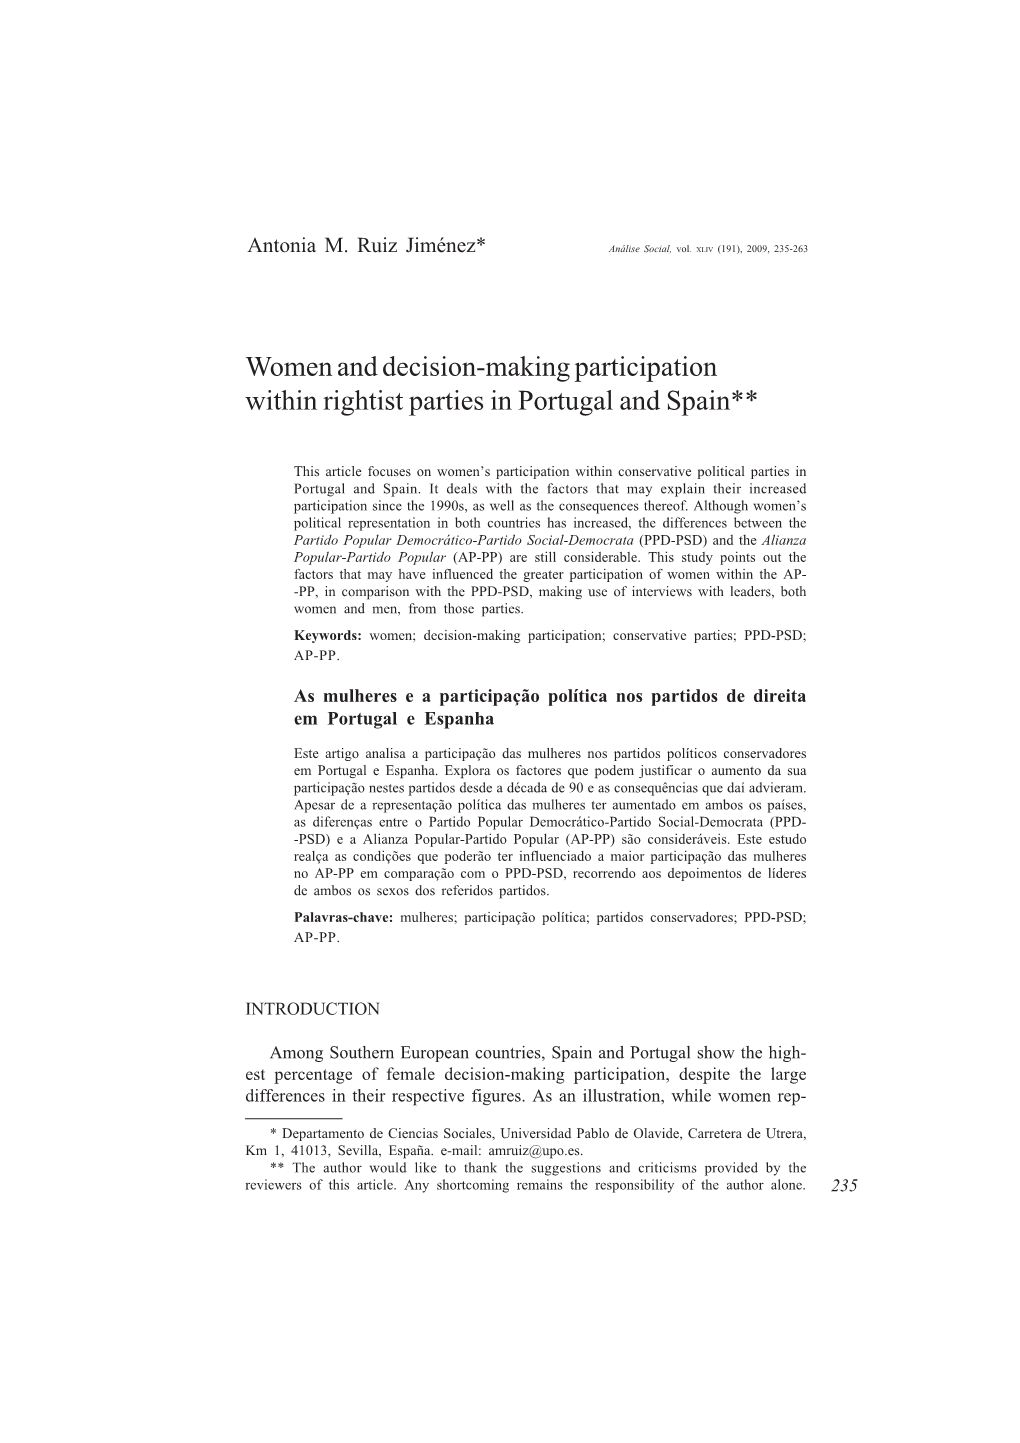 Women and Decision-Making Participation Within Rightist Parties in Portugal and Spain**